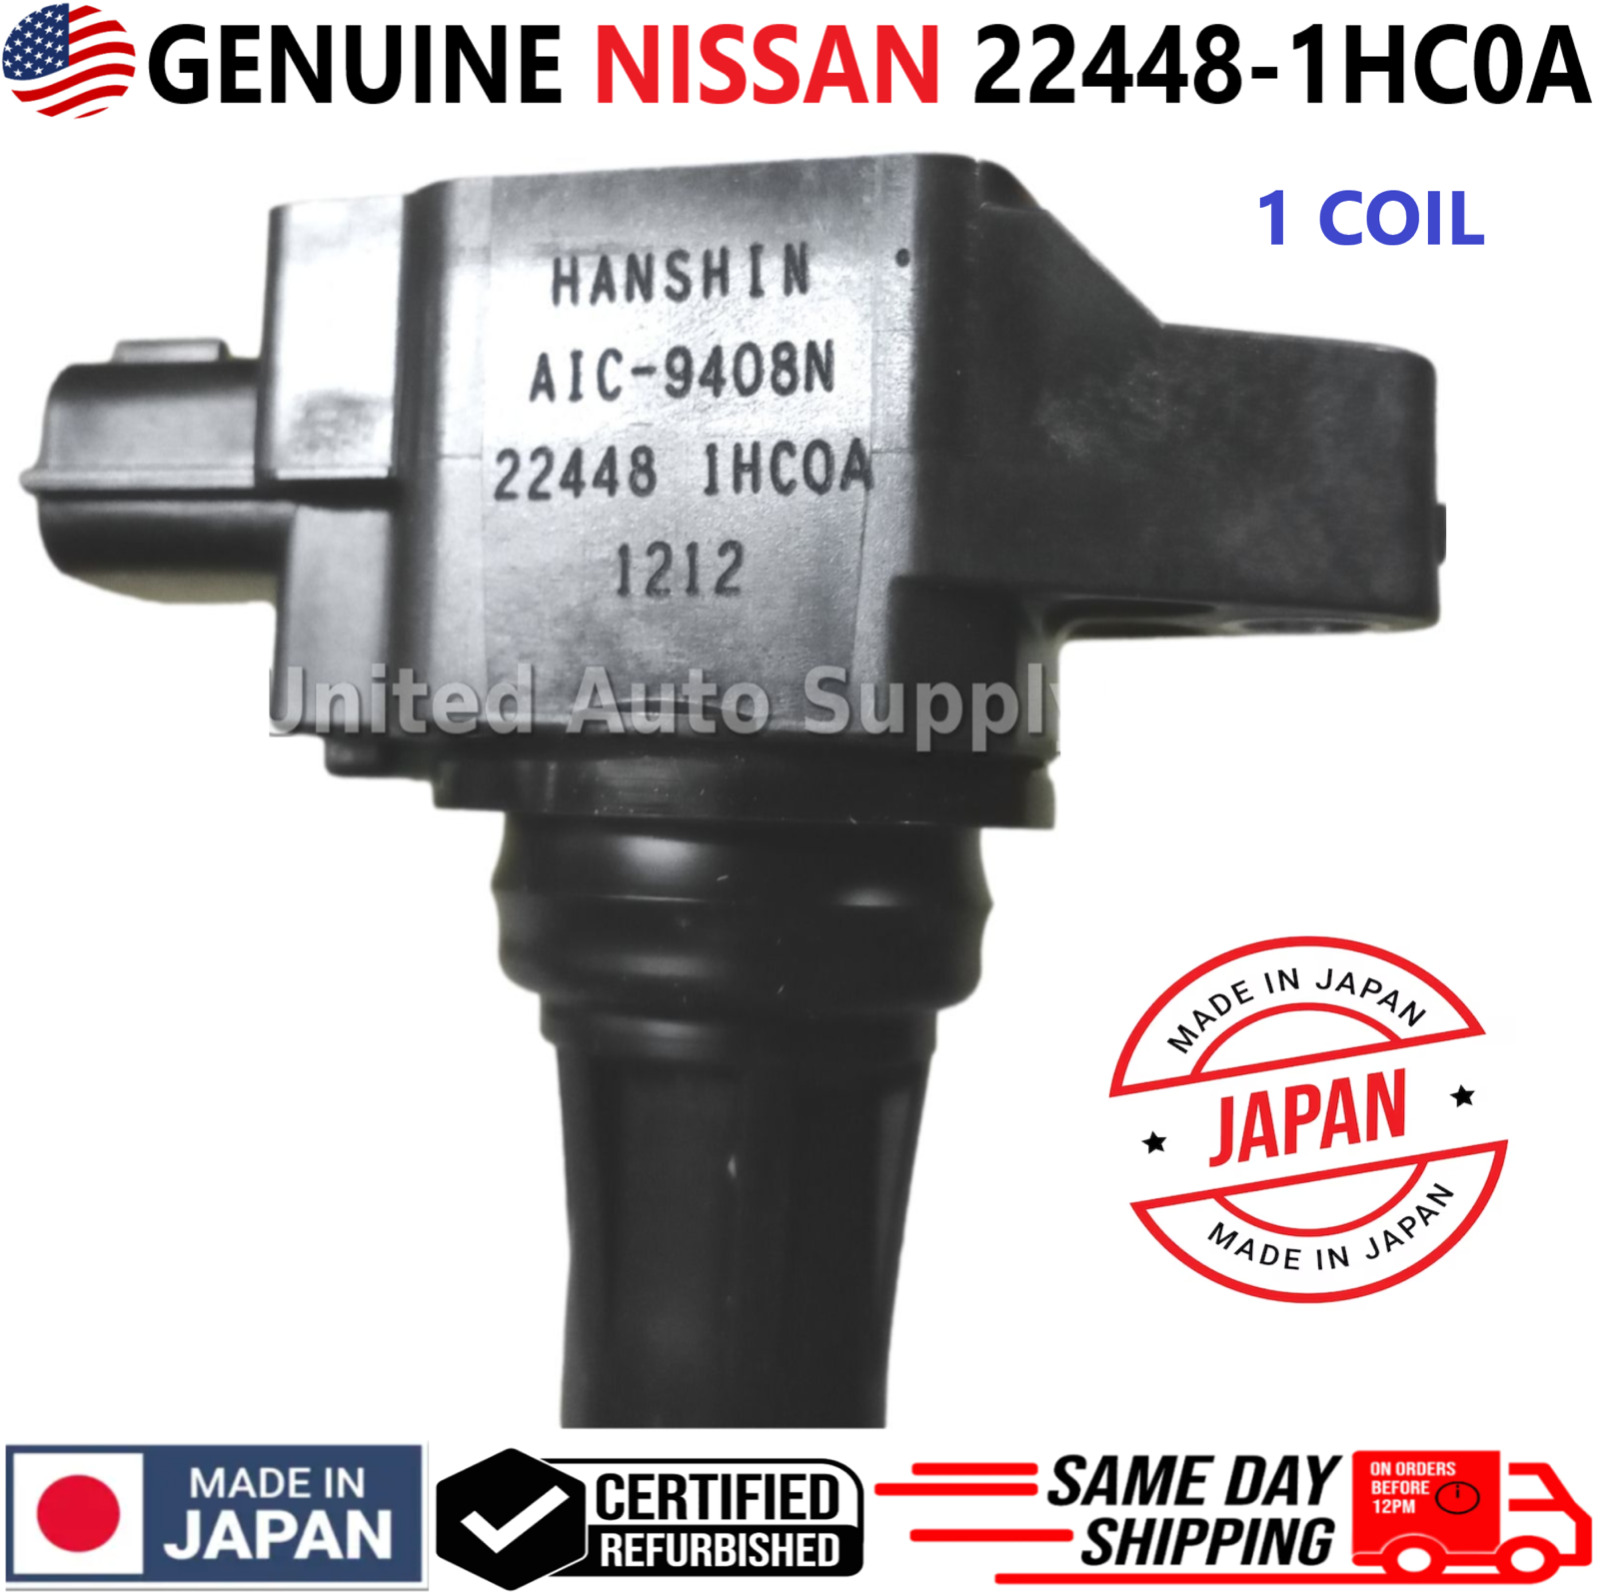 OEM NISSAN x1 Ignition Coil For 2012-2019 Nissan Versa & Versa Note, 22448-1HC0A